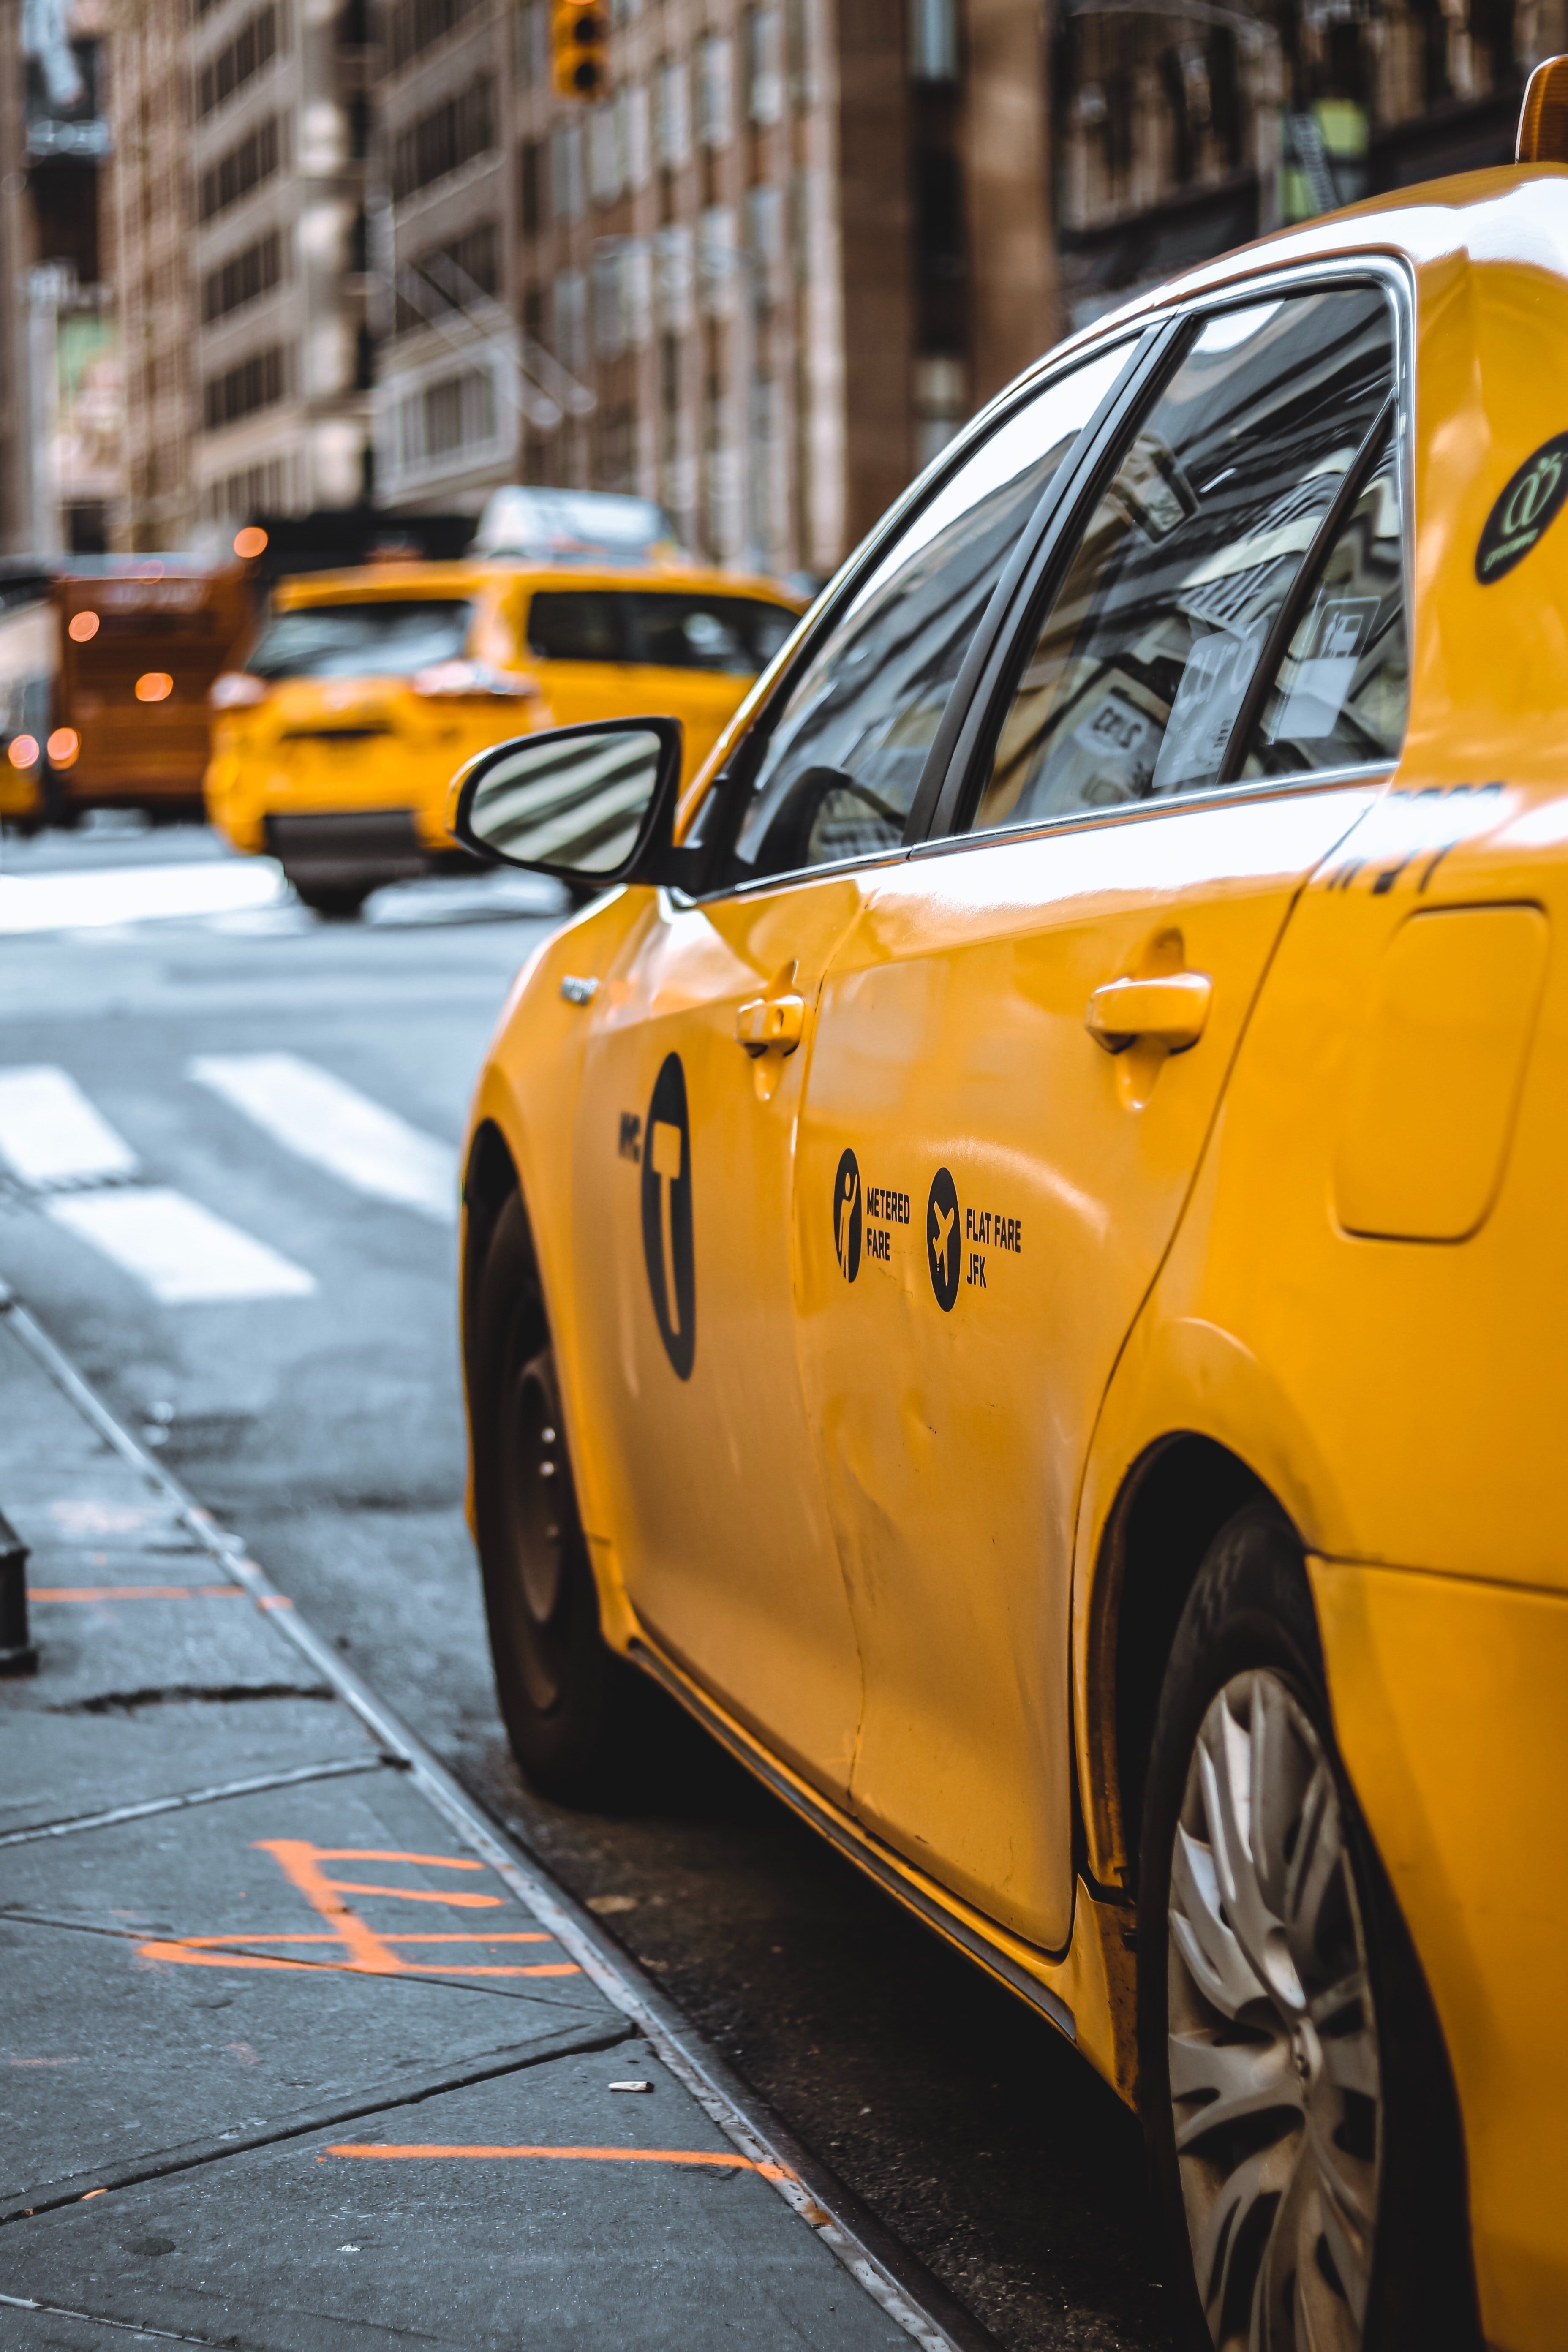 Bart was run over by a taxi. | Source: Unsplash